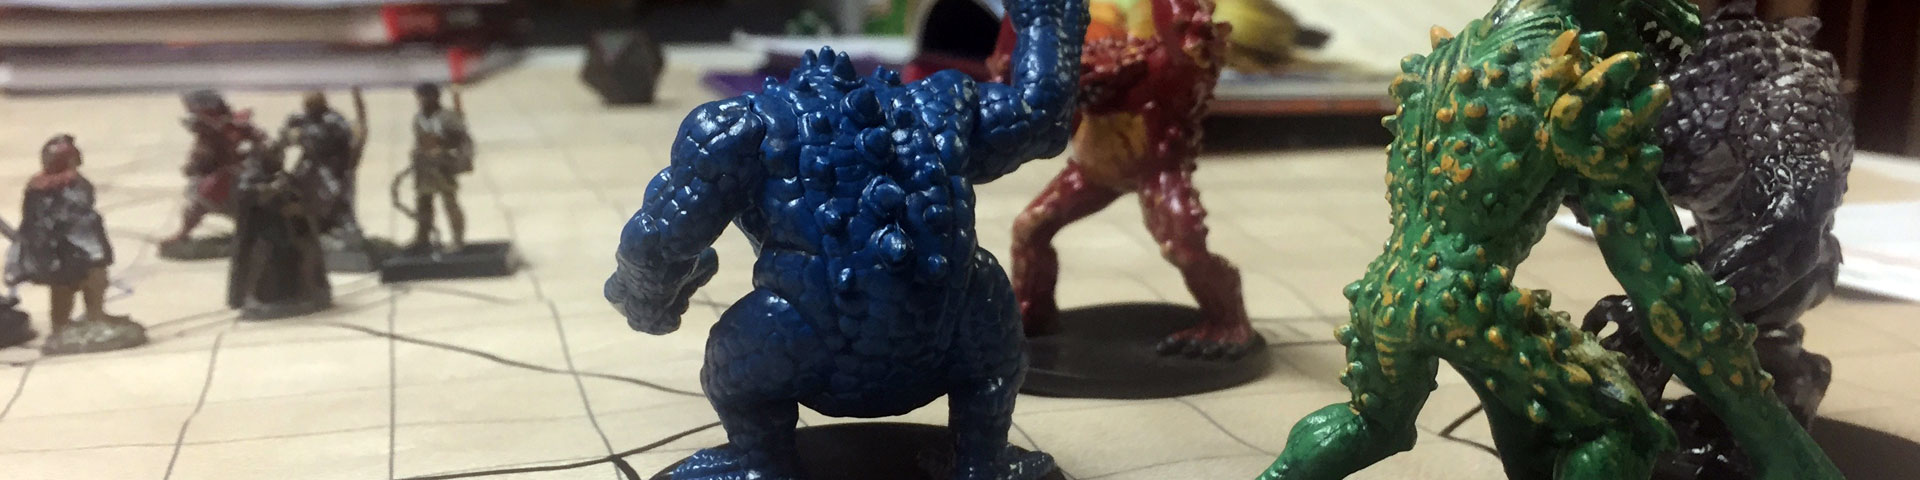 Plastic miniatures of the frog-like monsters known as slaadi stand on a battlemap. In the background can be seen several figures representing player characters.